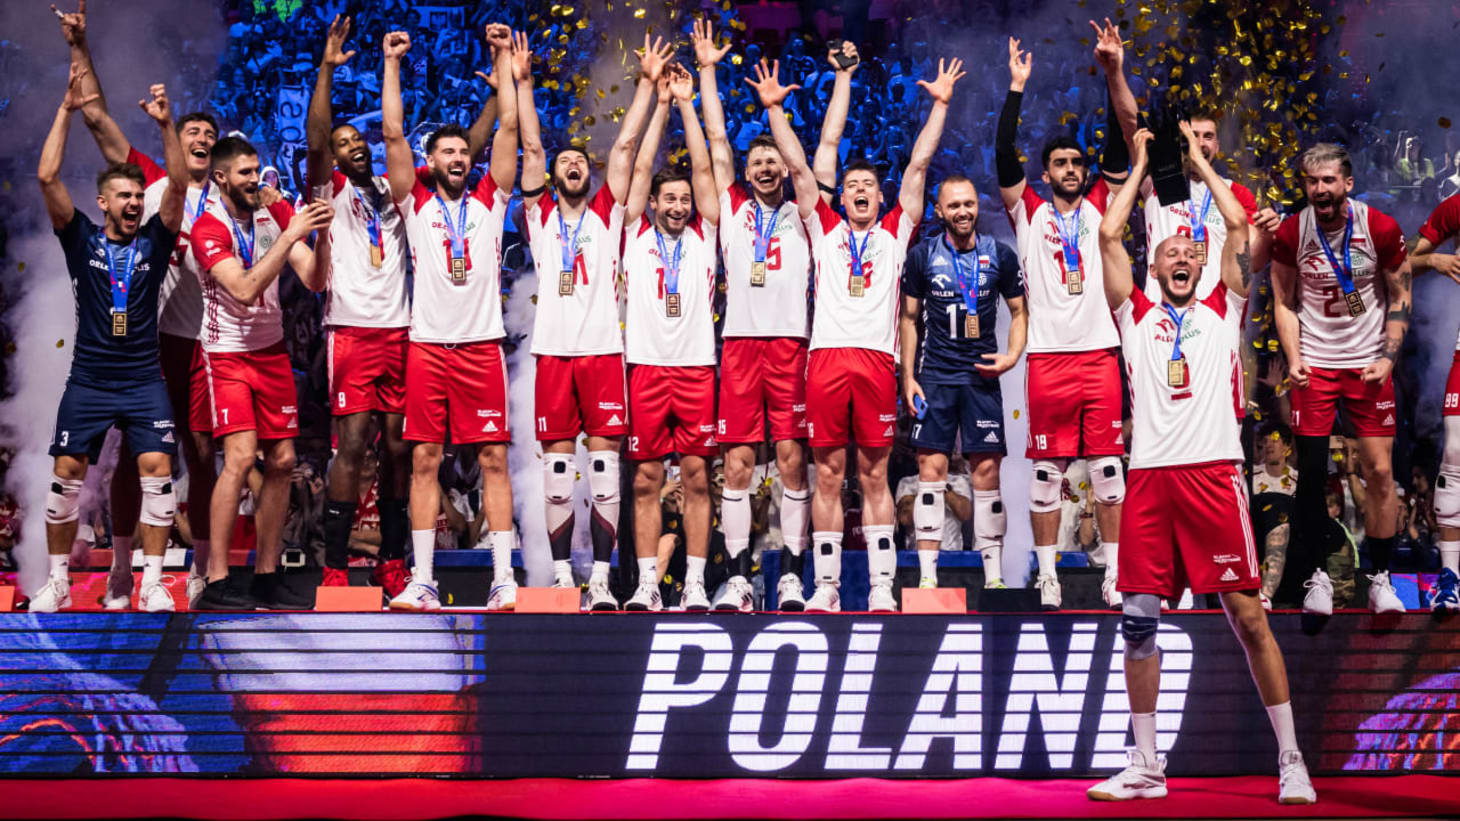 challenge cup volleyball live stream